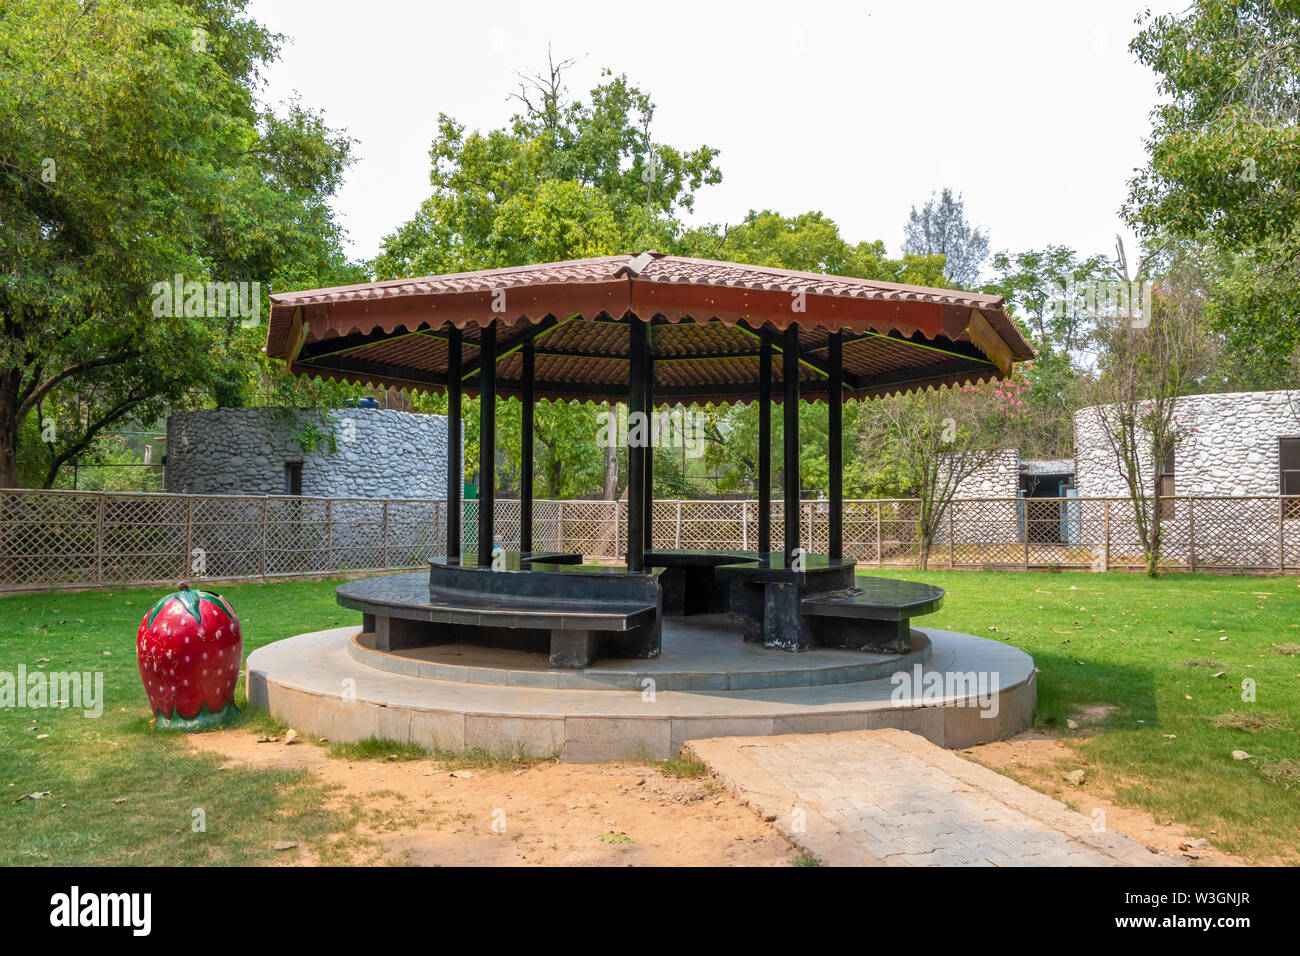 Steel structure shelter in a garden park with with benchs. place to spend time or rest. Stock Photo